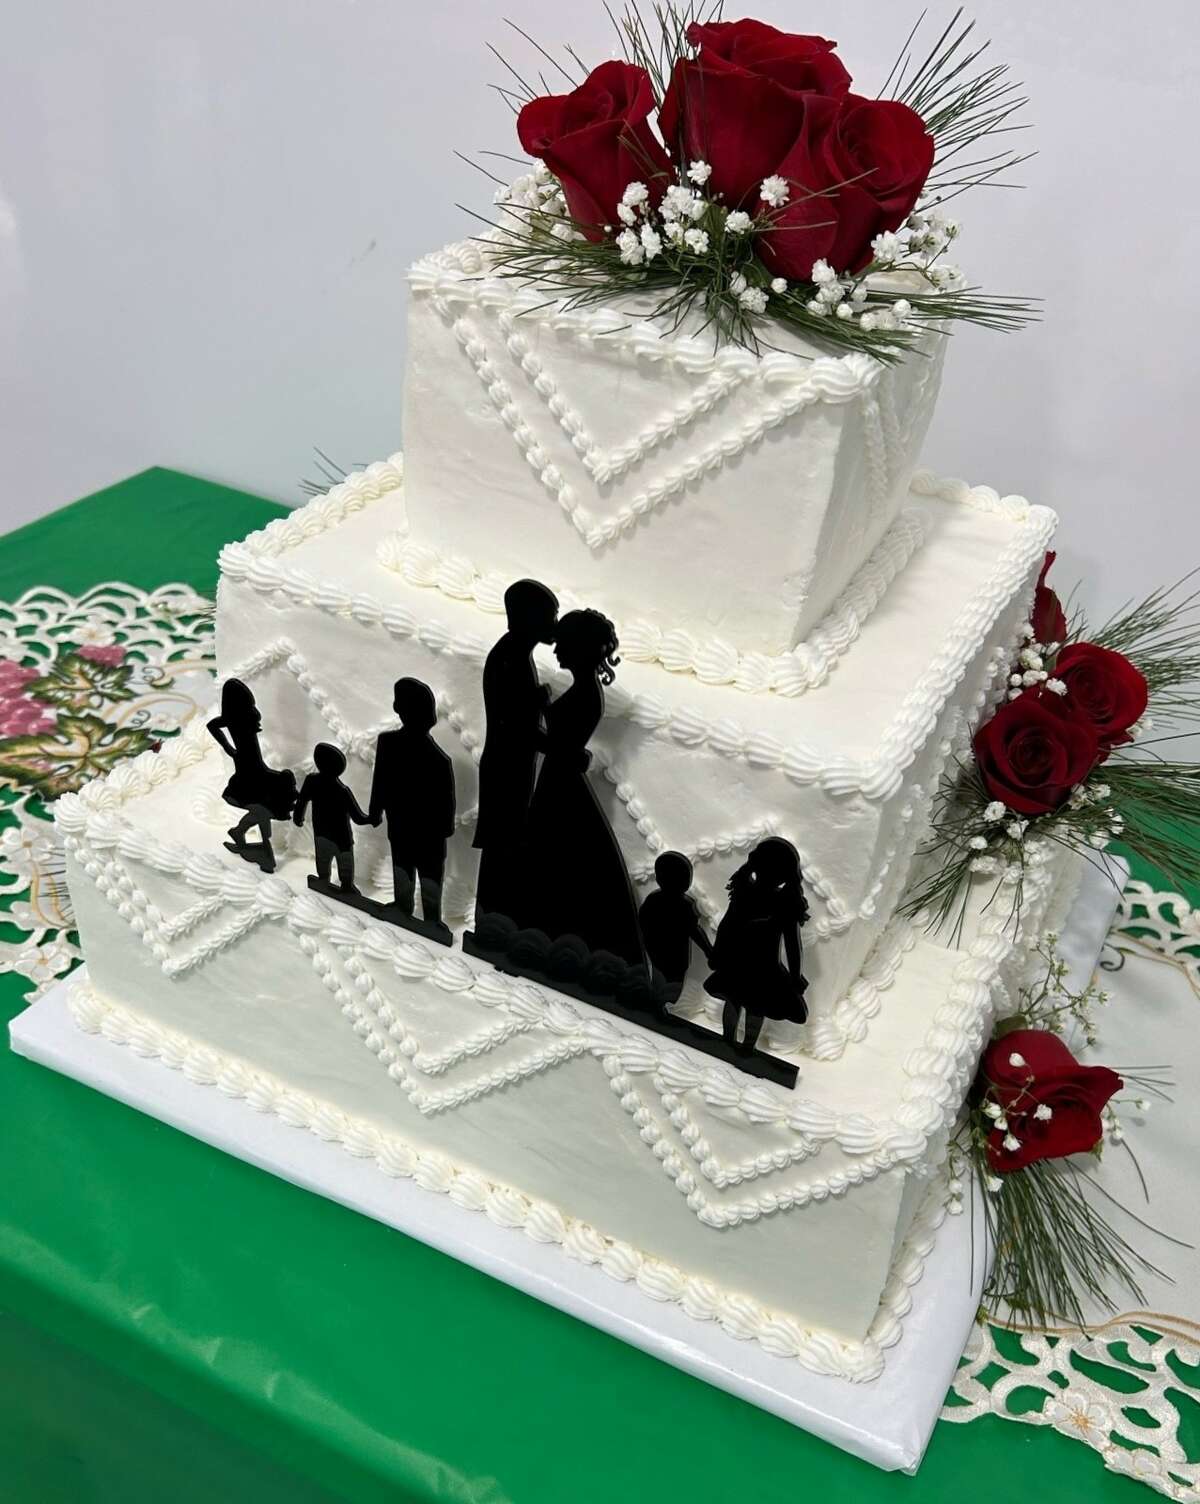 Pictured is the wedding cake used to celebrate the marriage of Susan and Ervin.